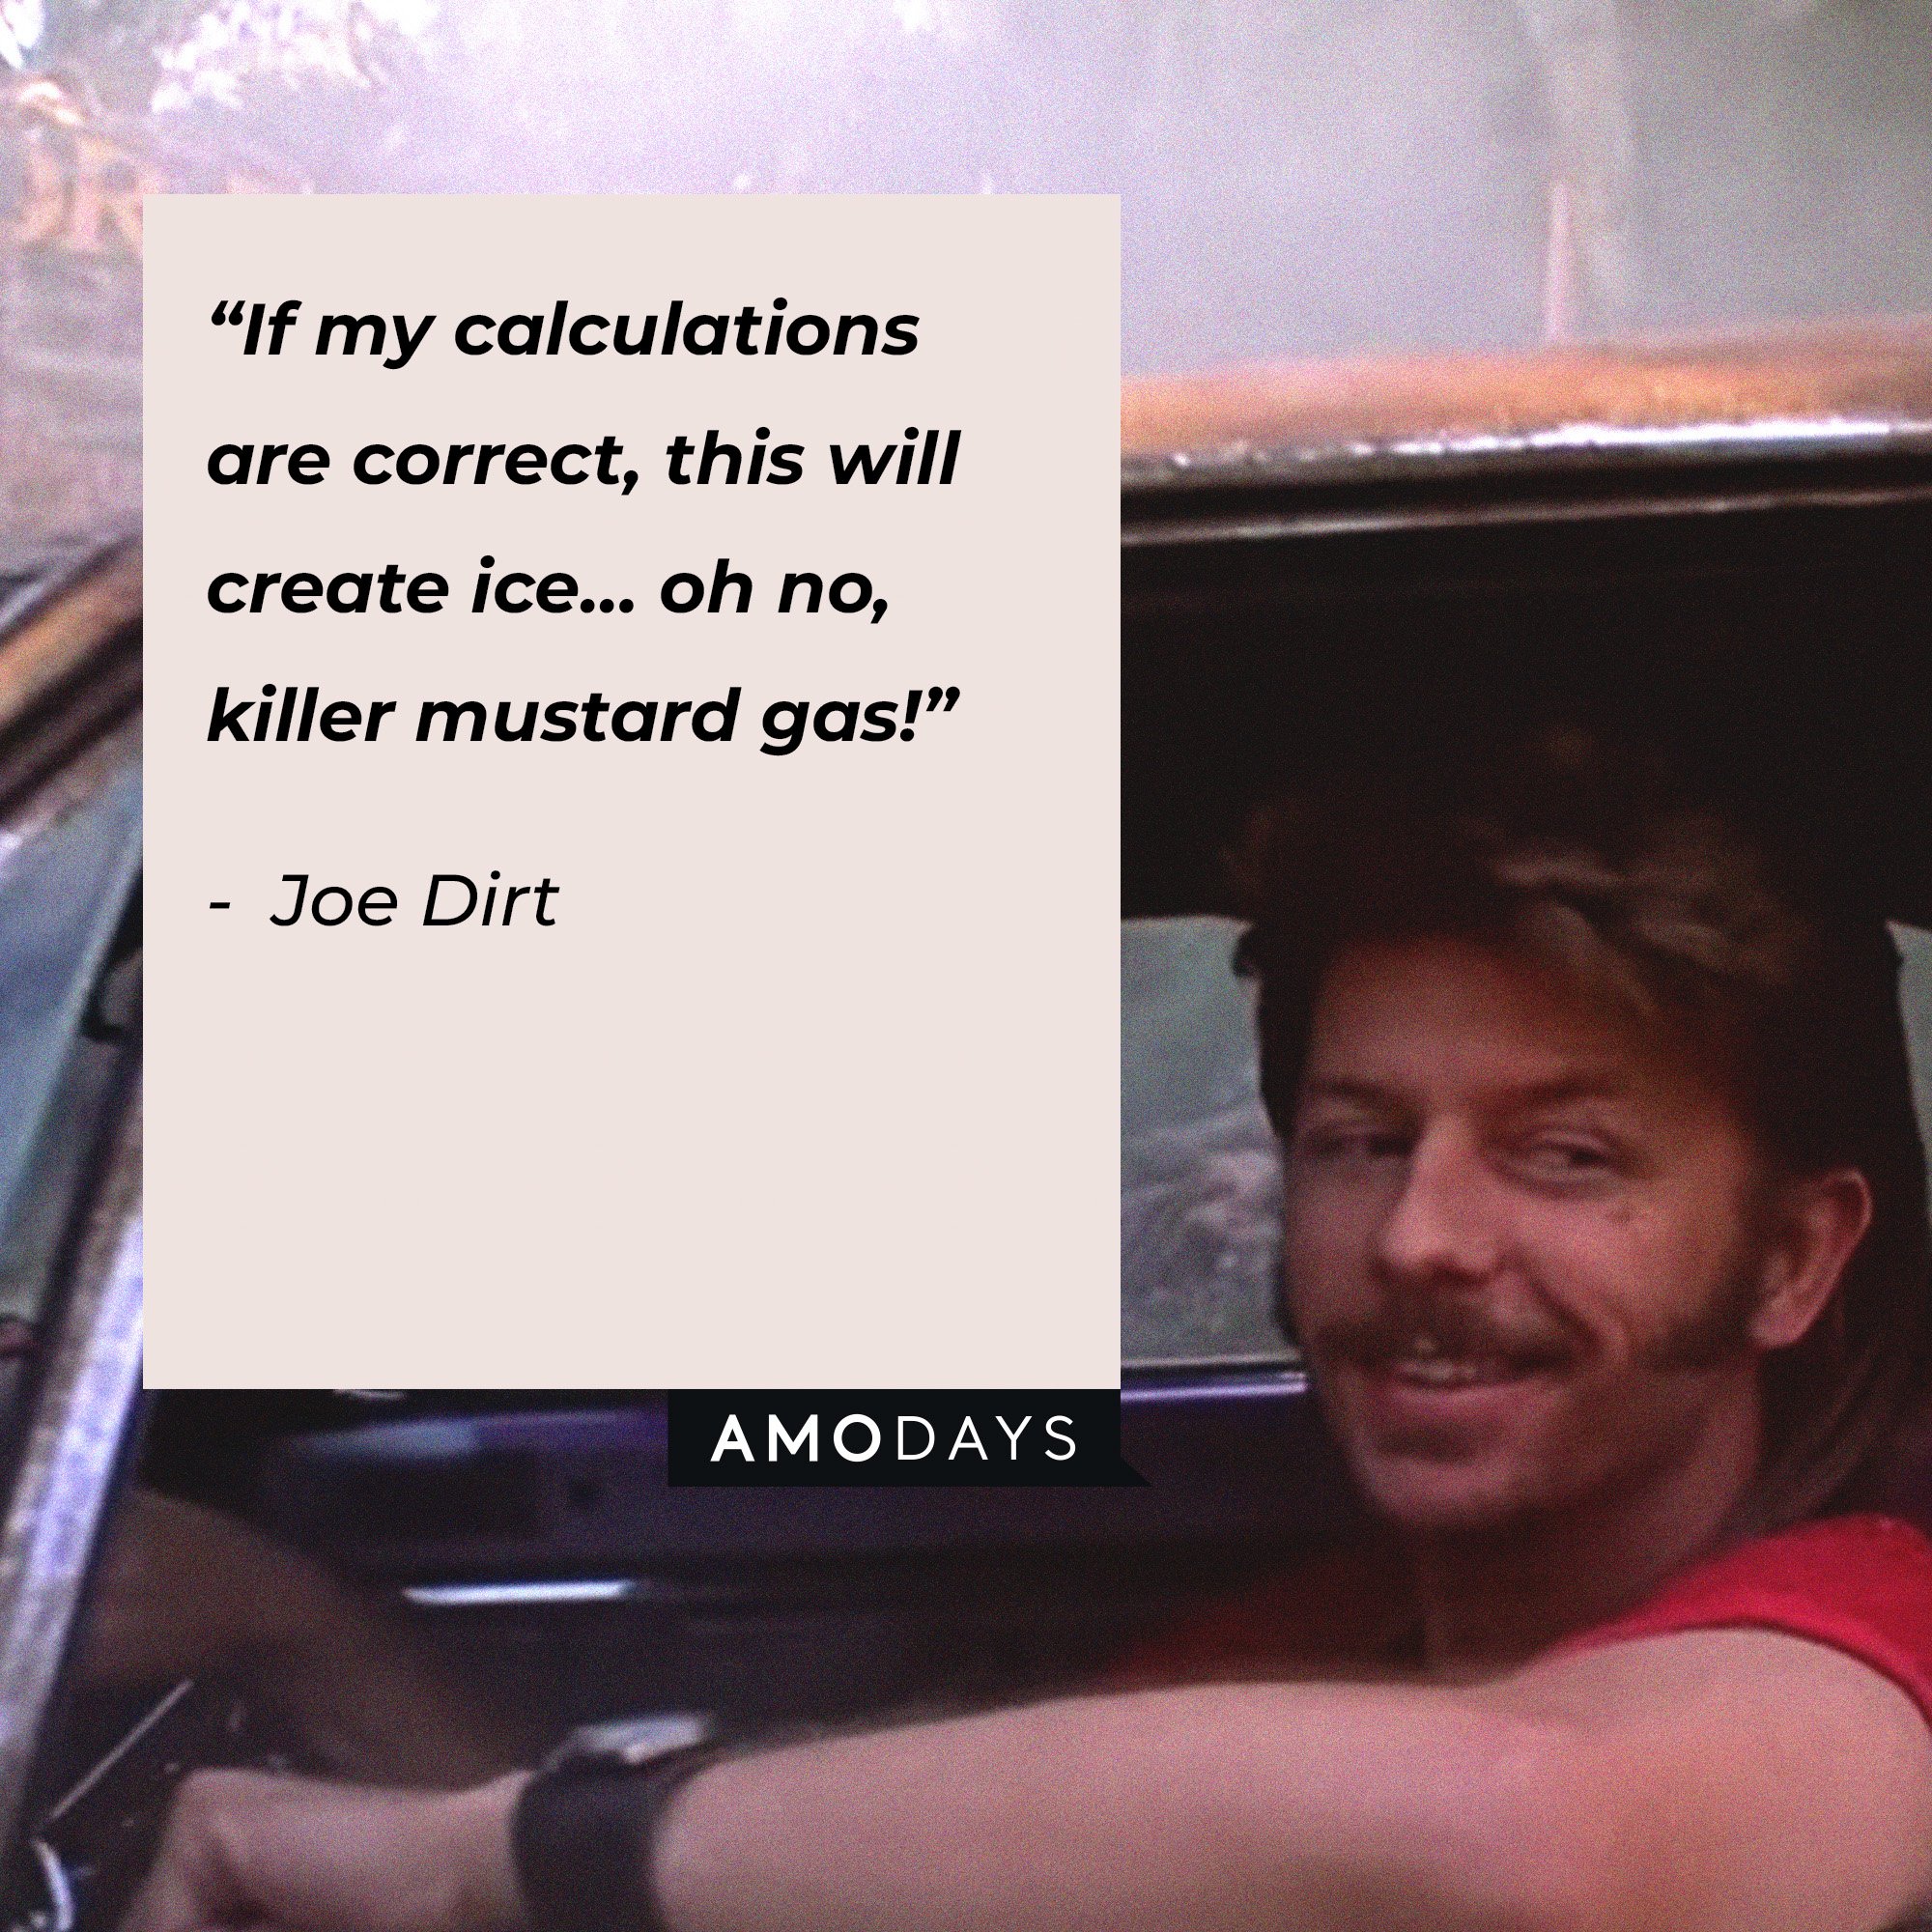  Joe Dirt's quote: “If my calculations are correct, this will create ice… oh no, killer mustard gas!” | Image: AmoDays